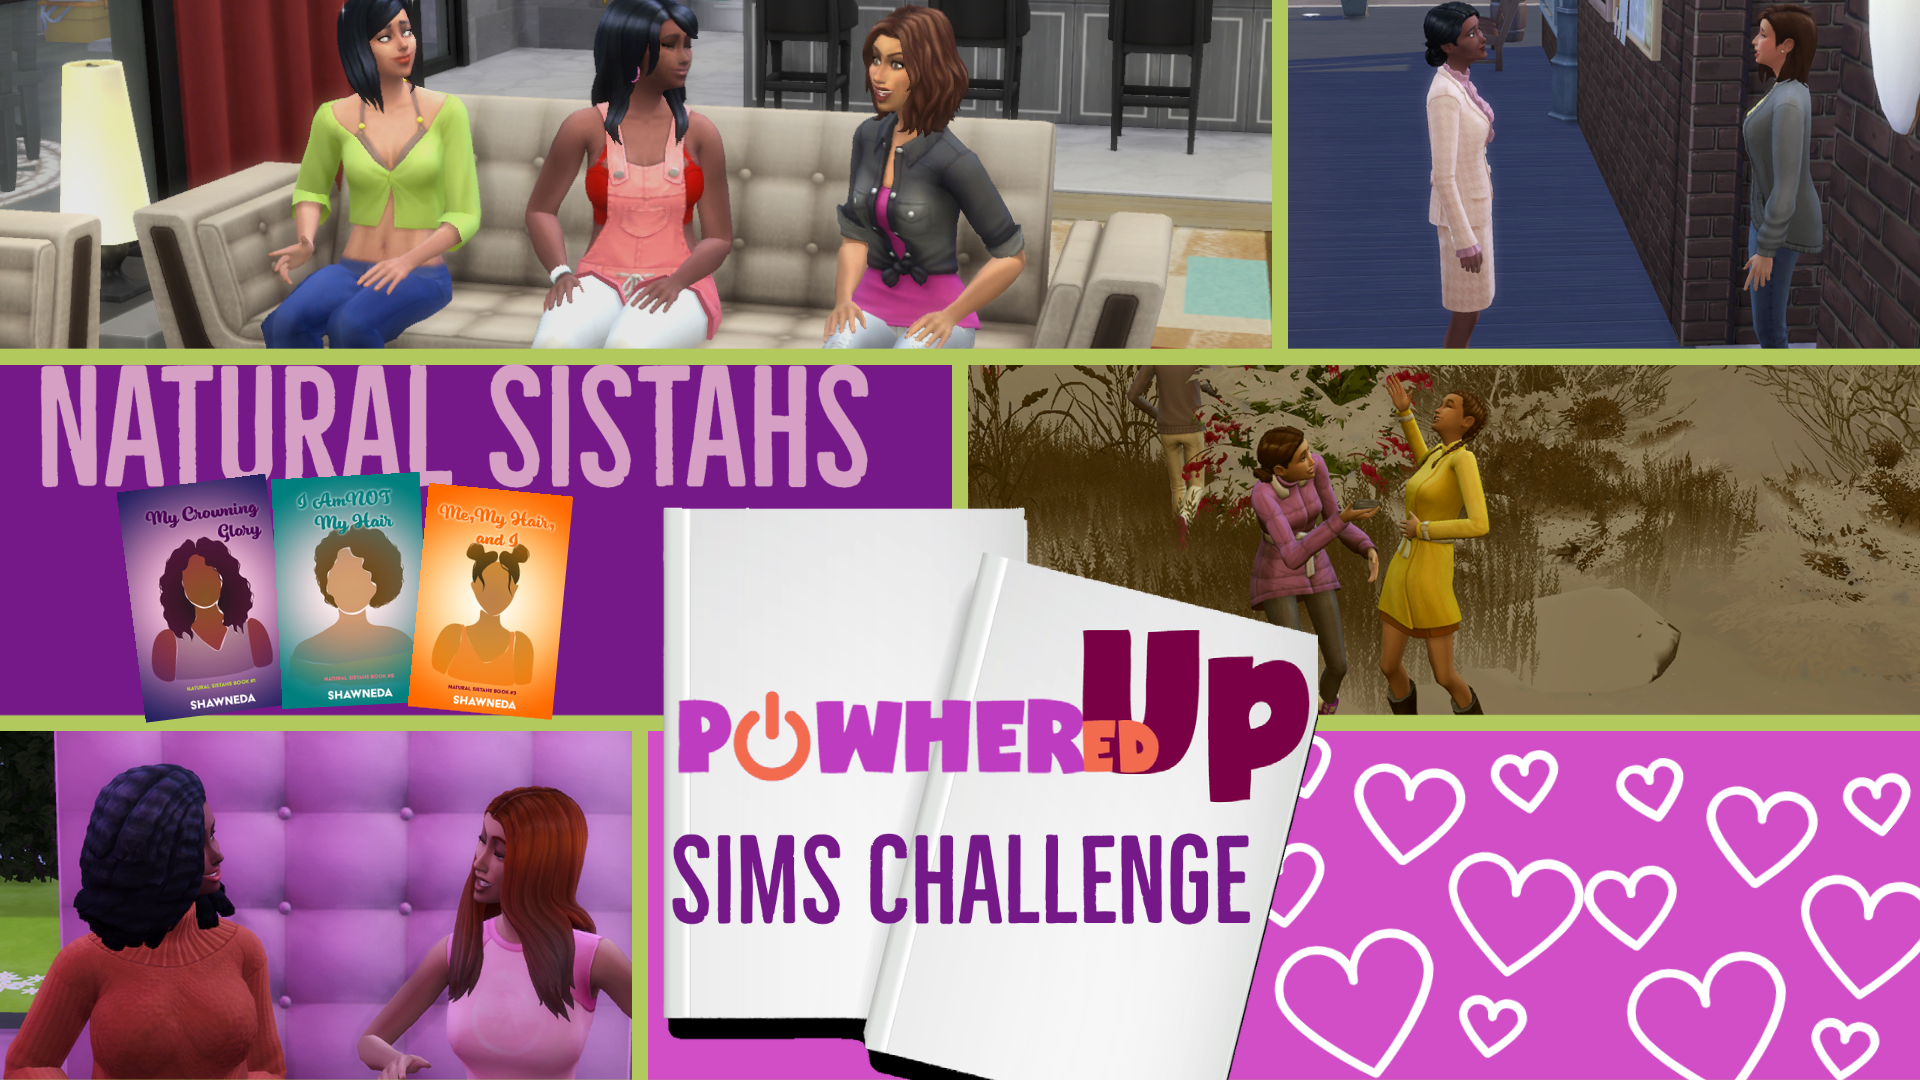 Landscape image of the Natural Sistahs characters from SIMS 4 gameplay